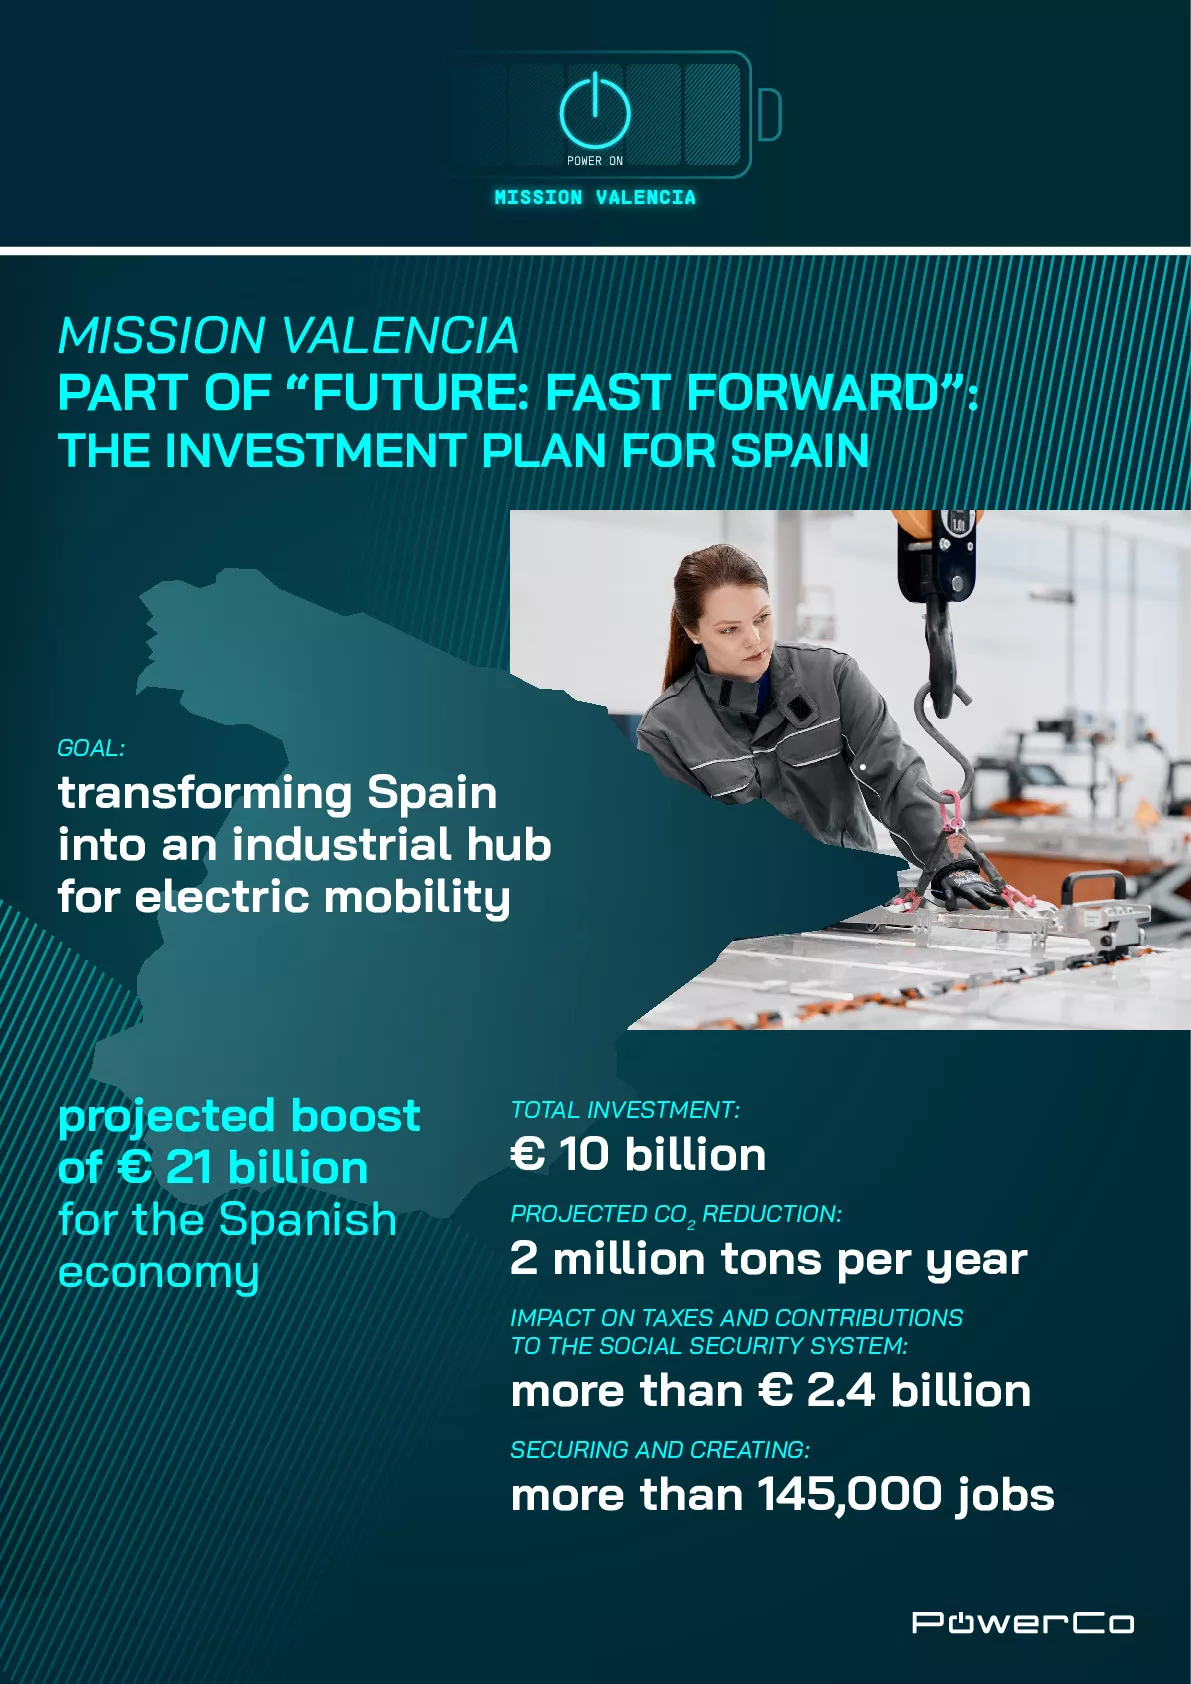 EN_03_Mission_Valencia_-_Part_of_Future_Fast_Foward_The_investment_plan_for_Spain-pdf